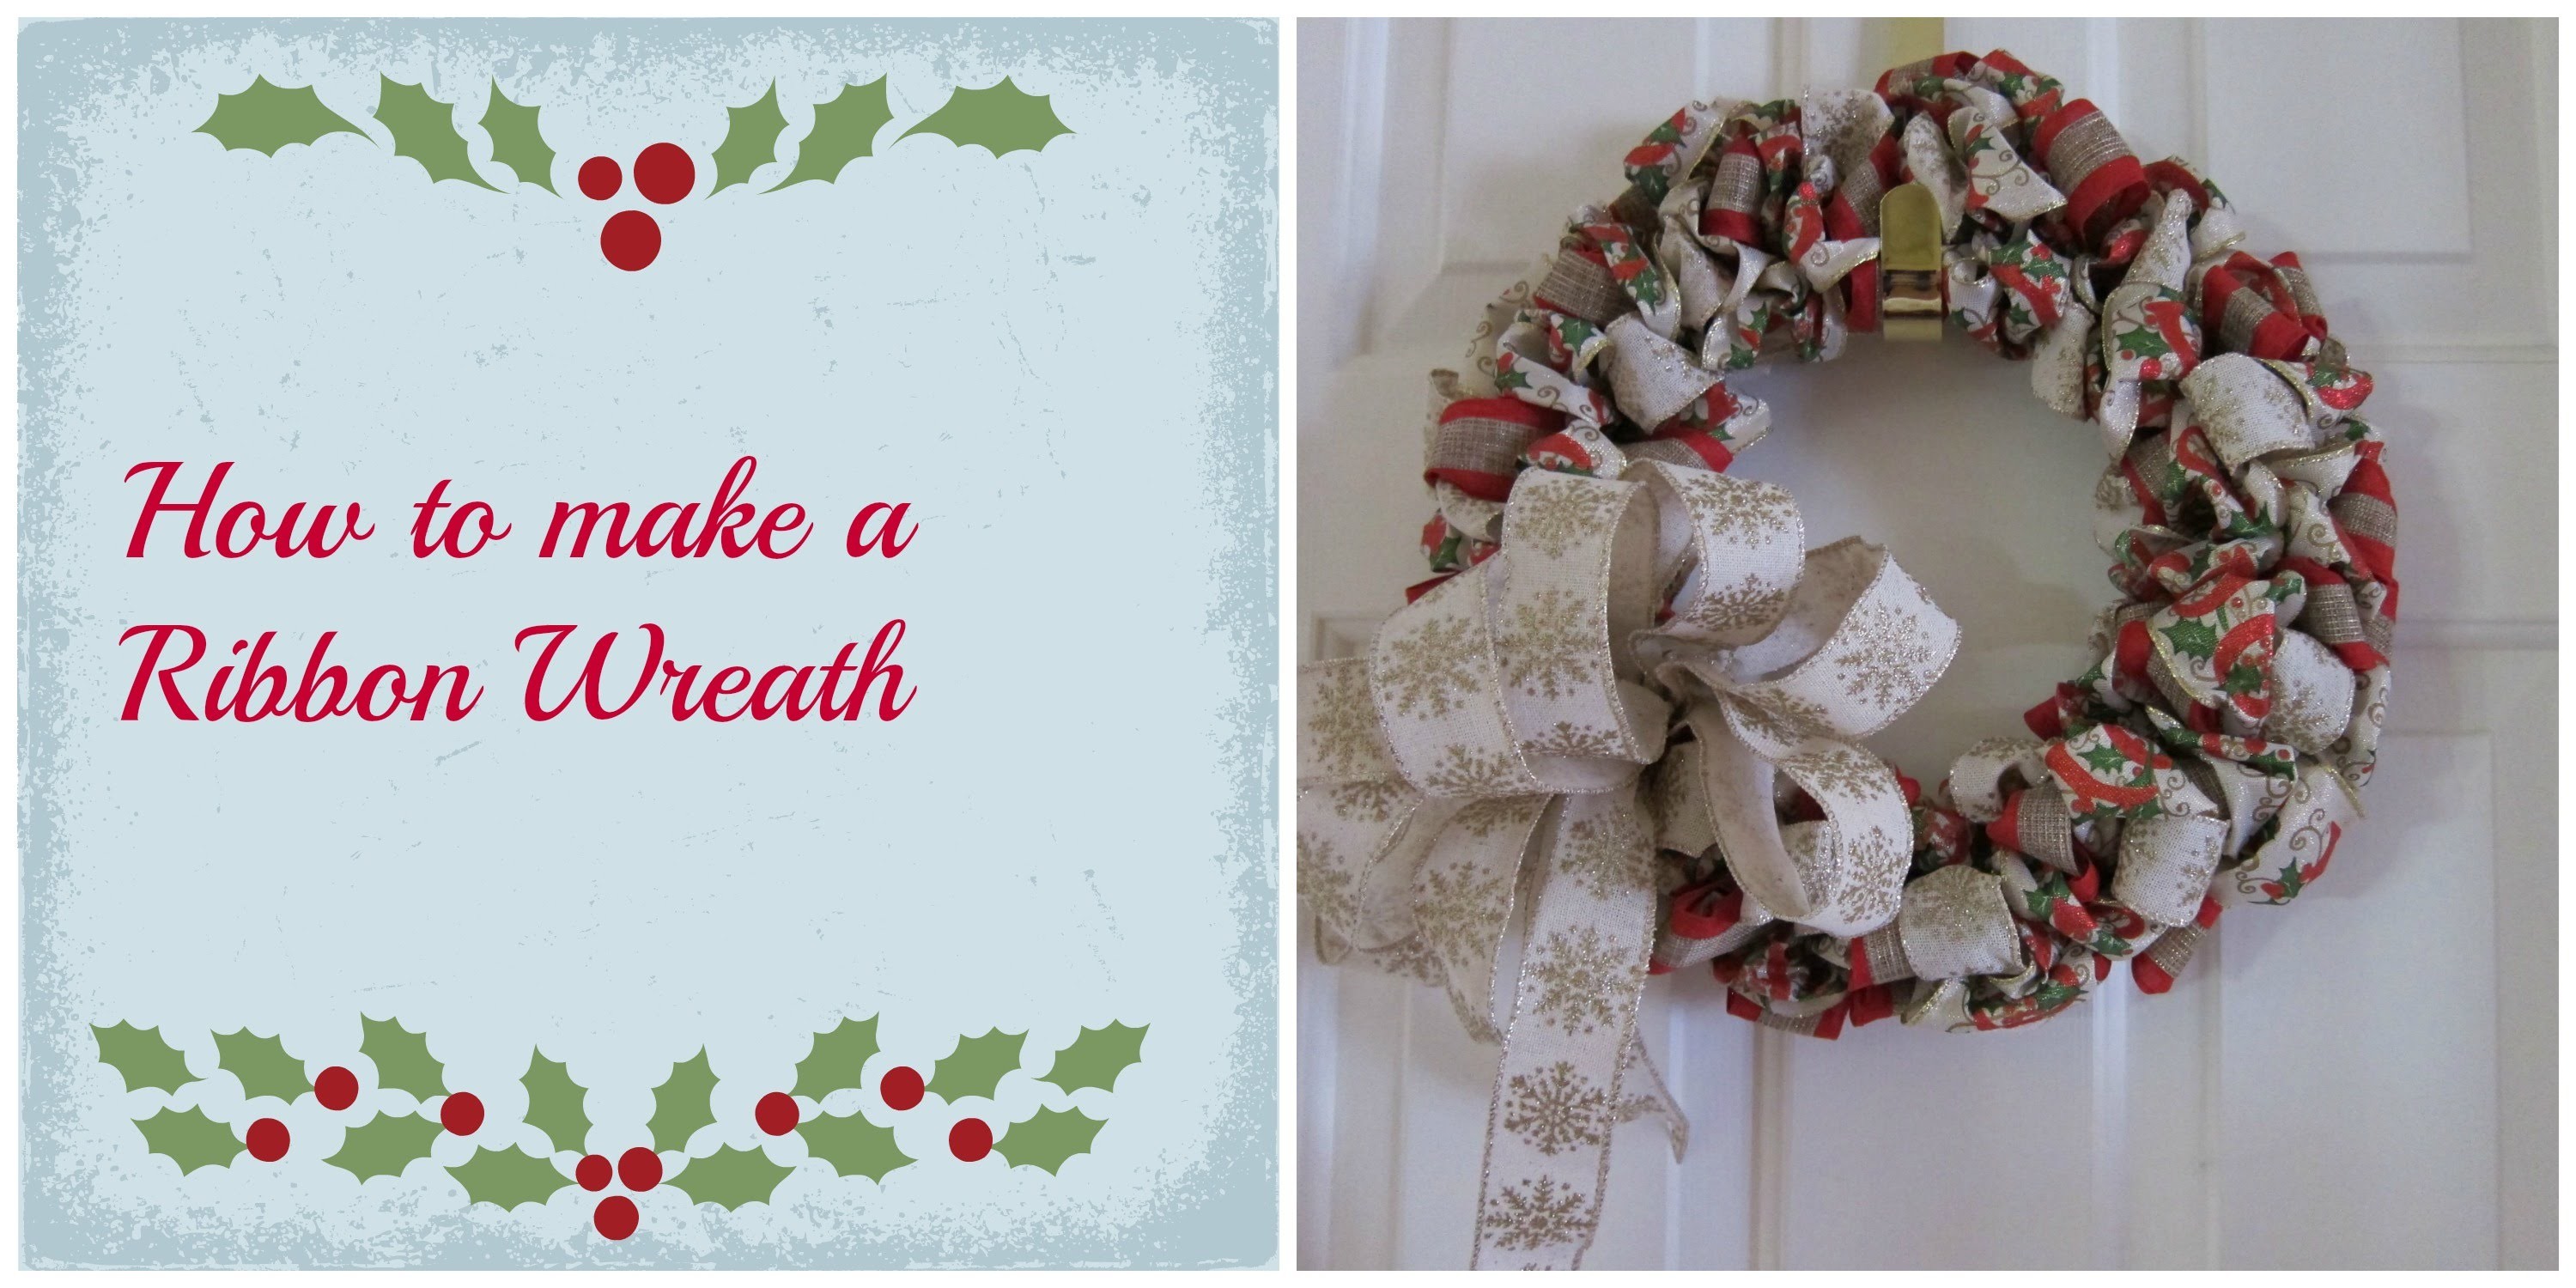 How to make a Ribbon Wreath with Michelle